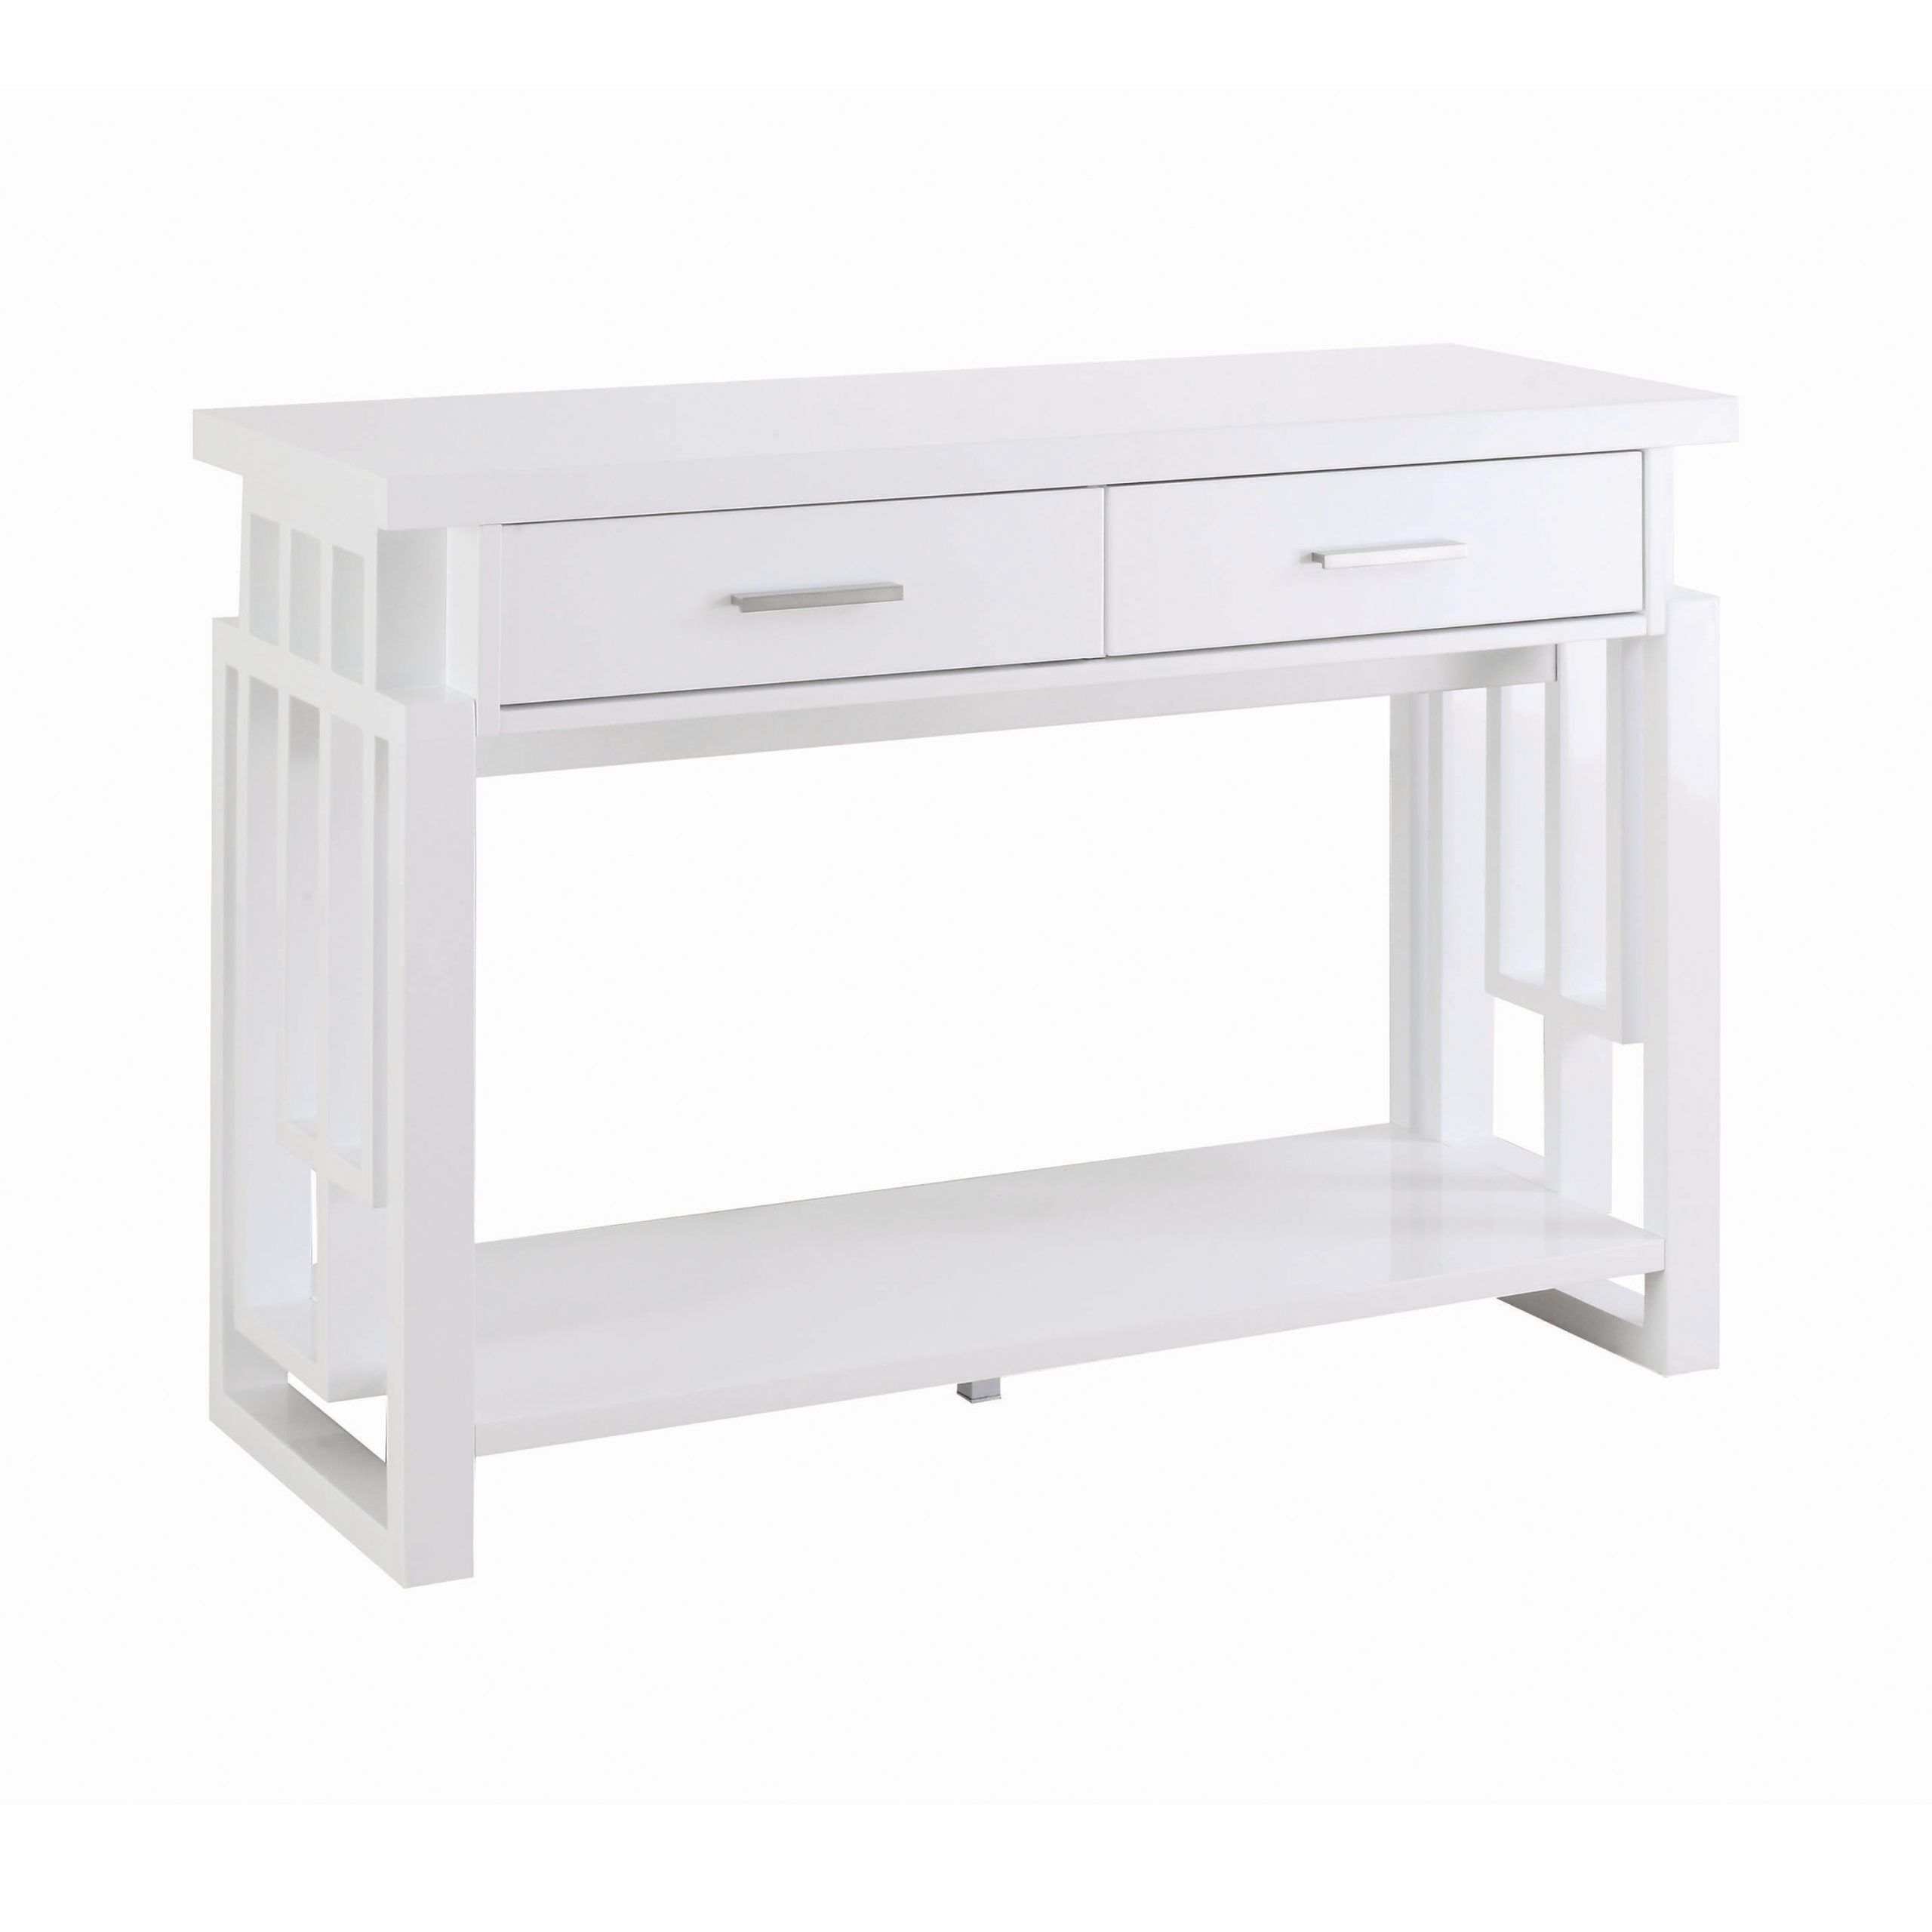 Rectangular 2 Drawer Sofa Table High Glossy White – Coaster With White Gloss And Maple Cream Console Tables (View 17 of 20)